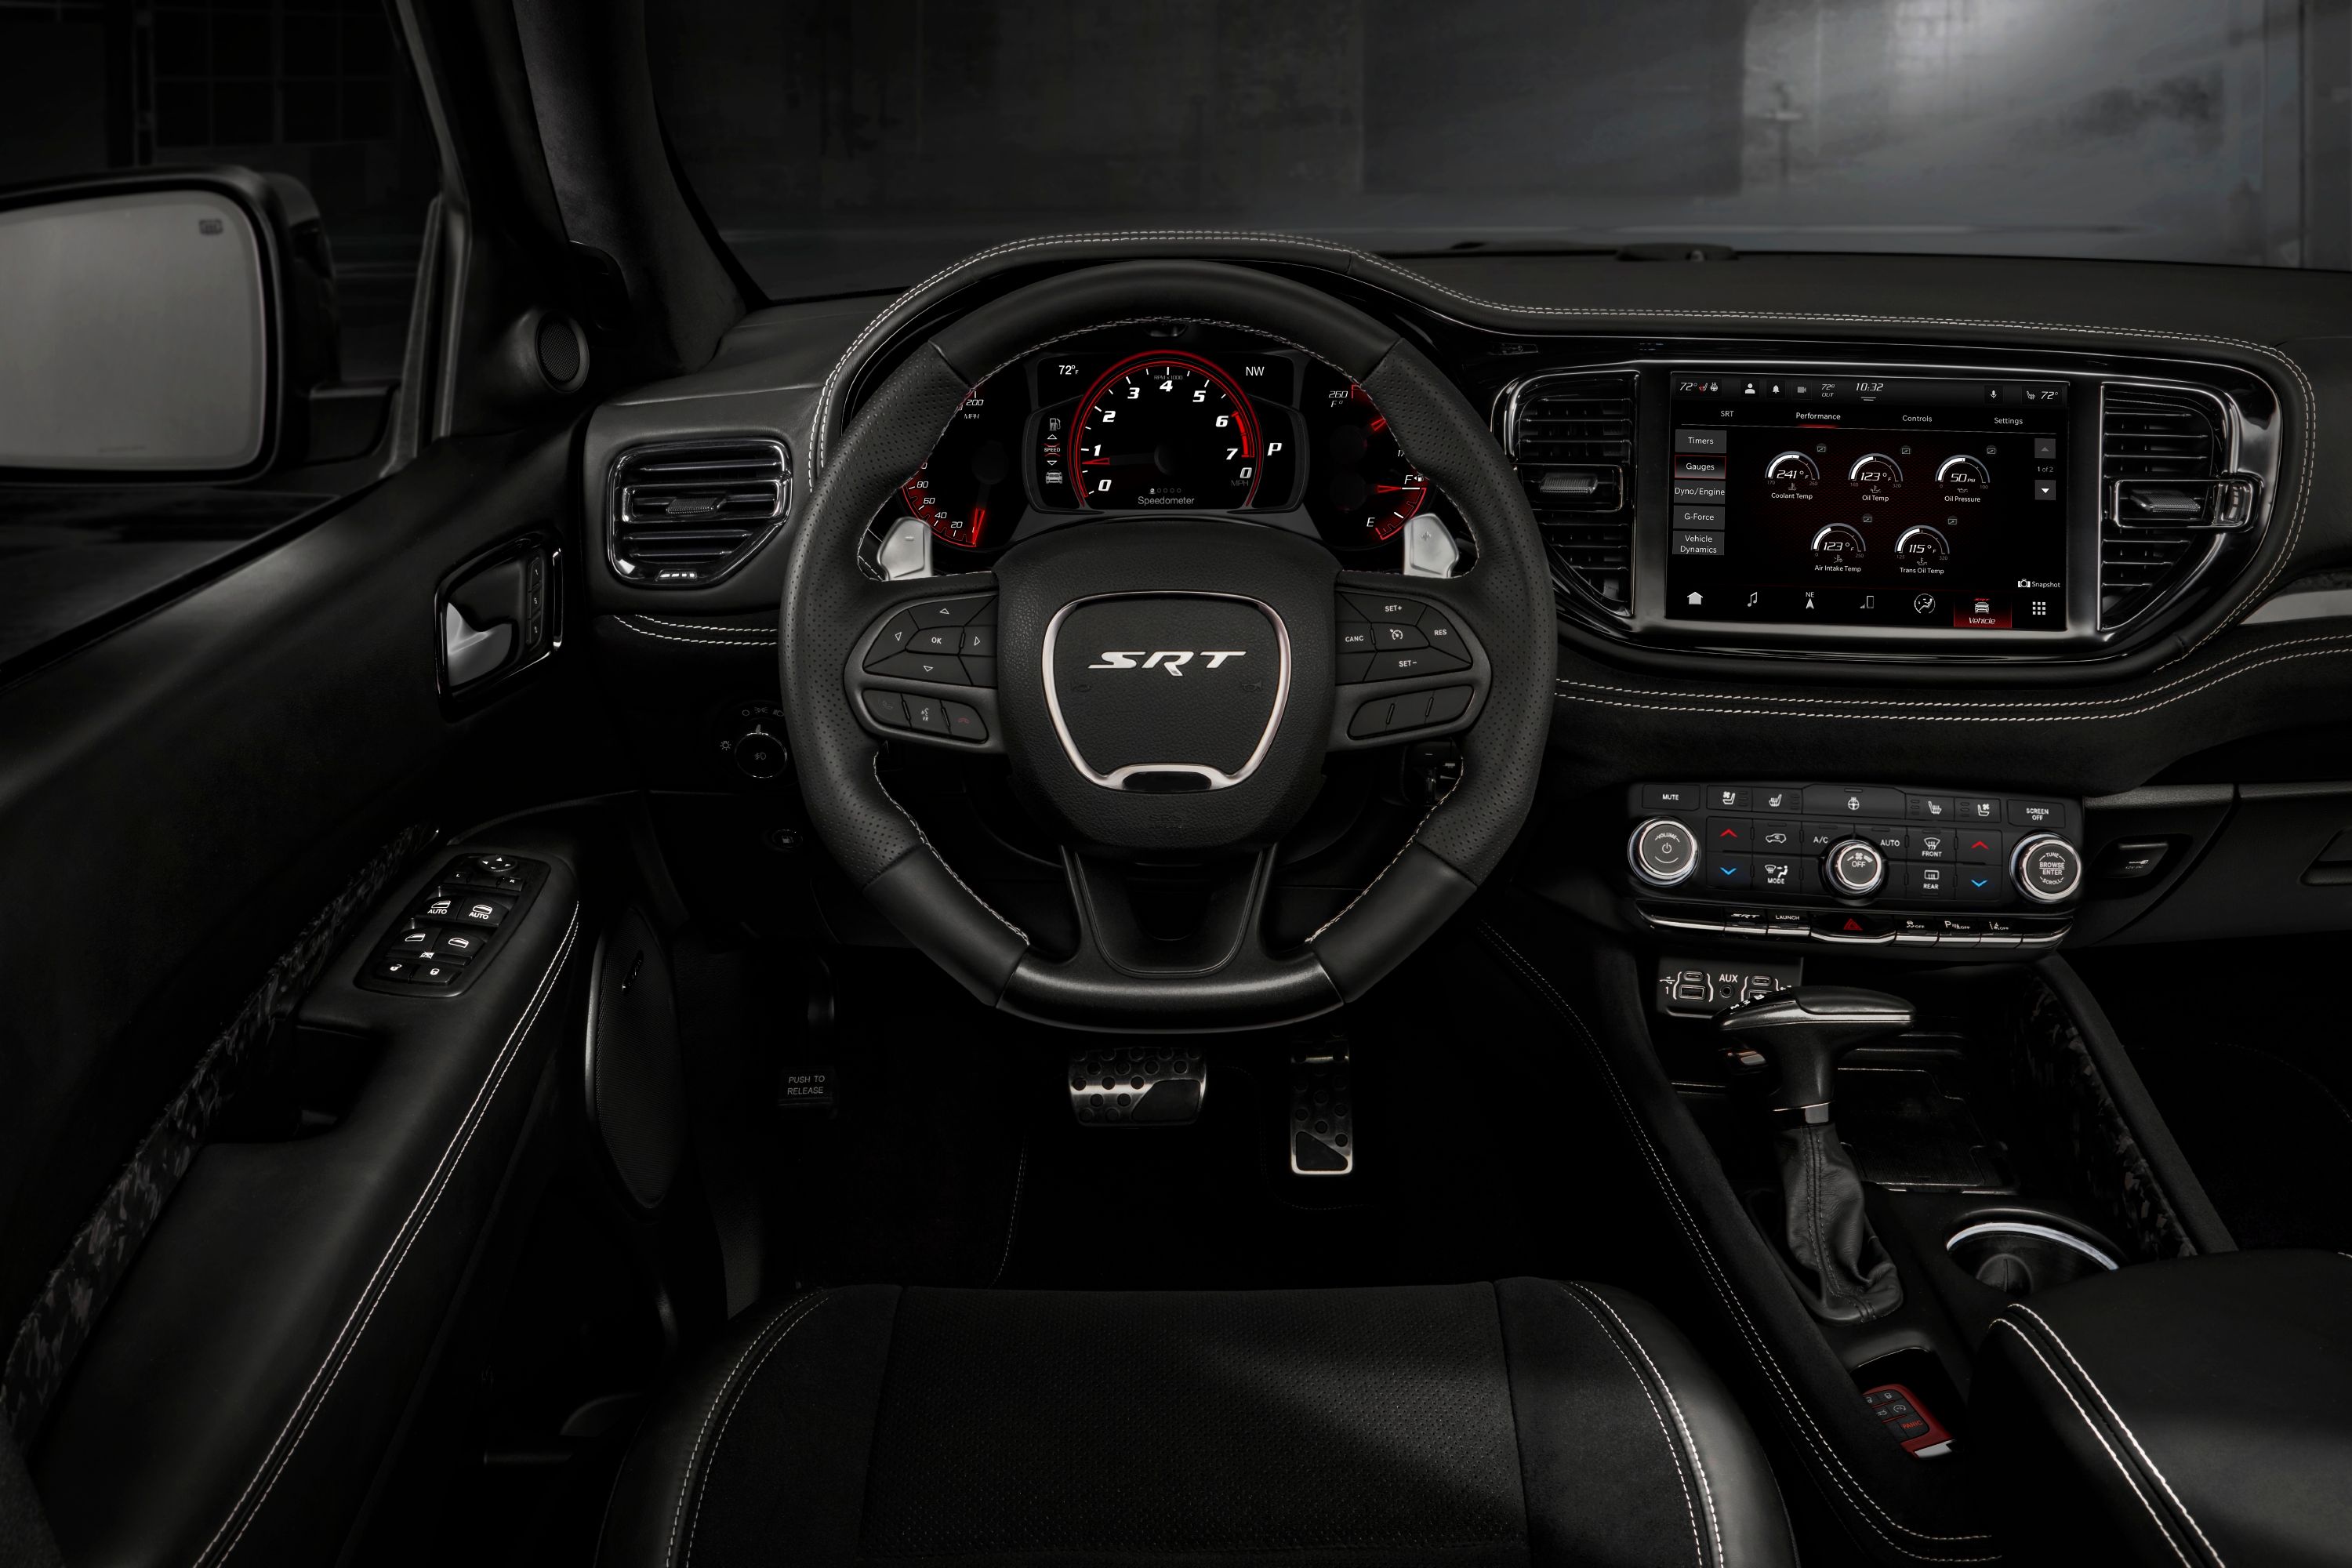 The driver-oriented interior of the Dodge Durango Hellcat.